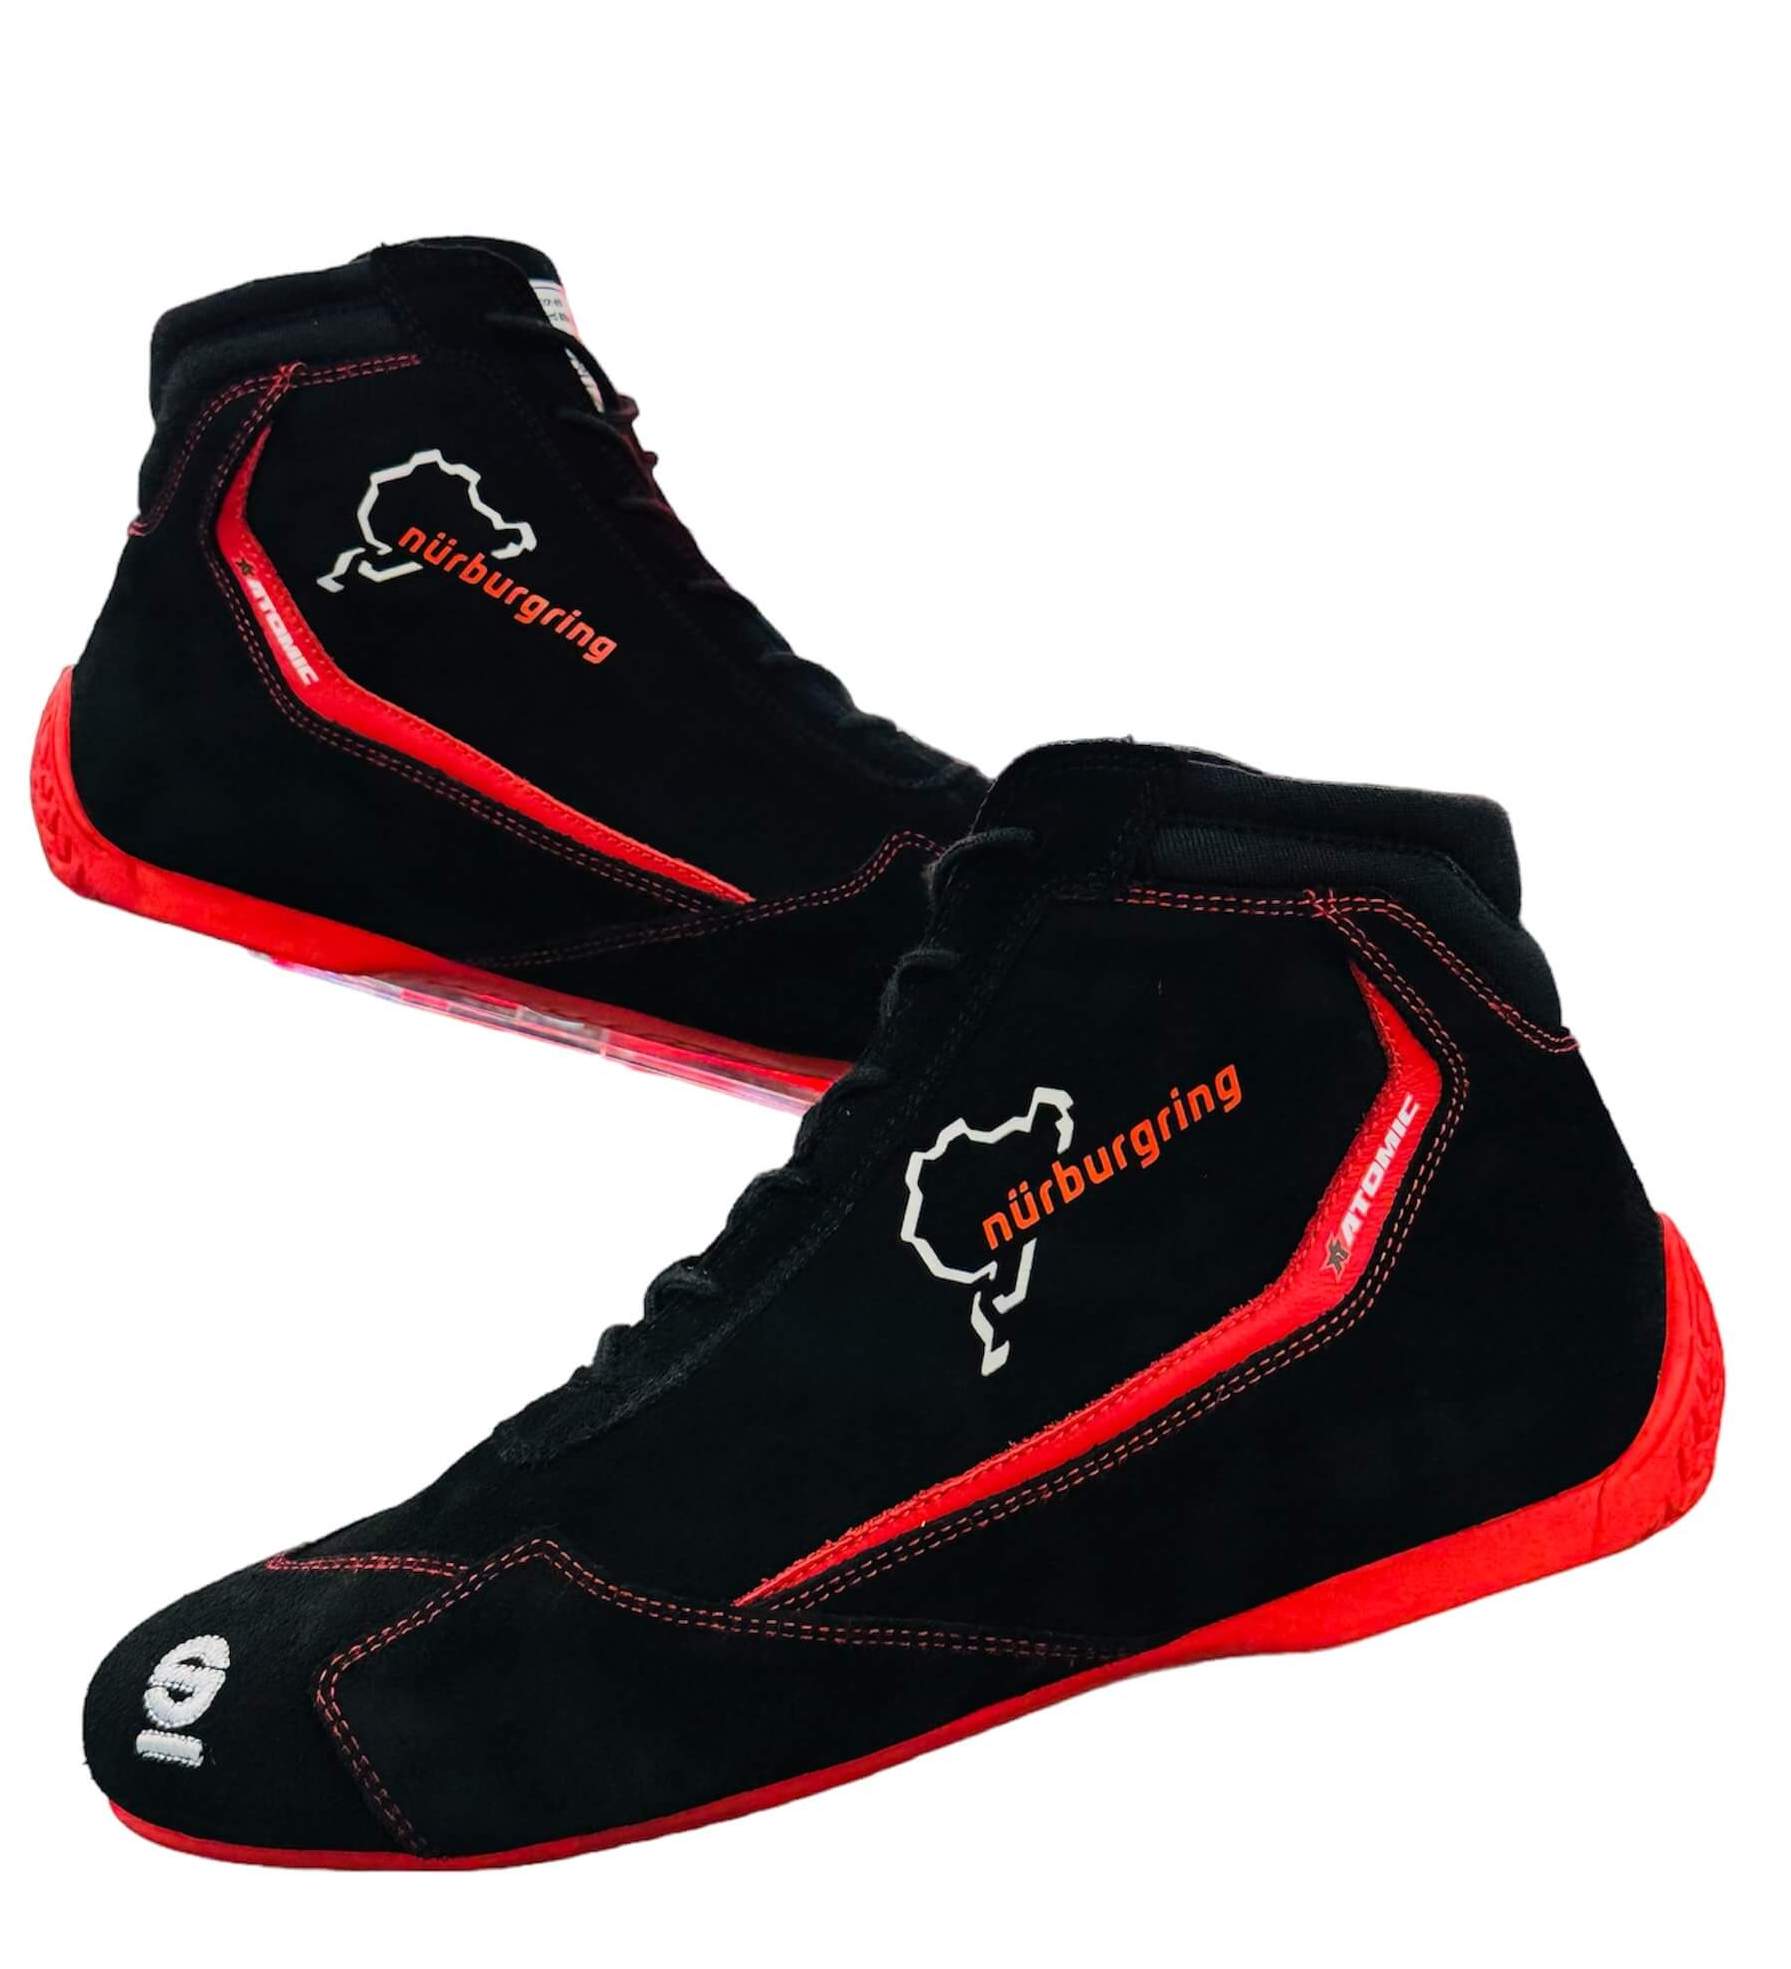 SPARCO 001295SP_NBR46 Shoes Slalom Nurburgring Edition black/red Size 46 Photo-3 